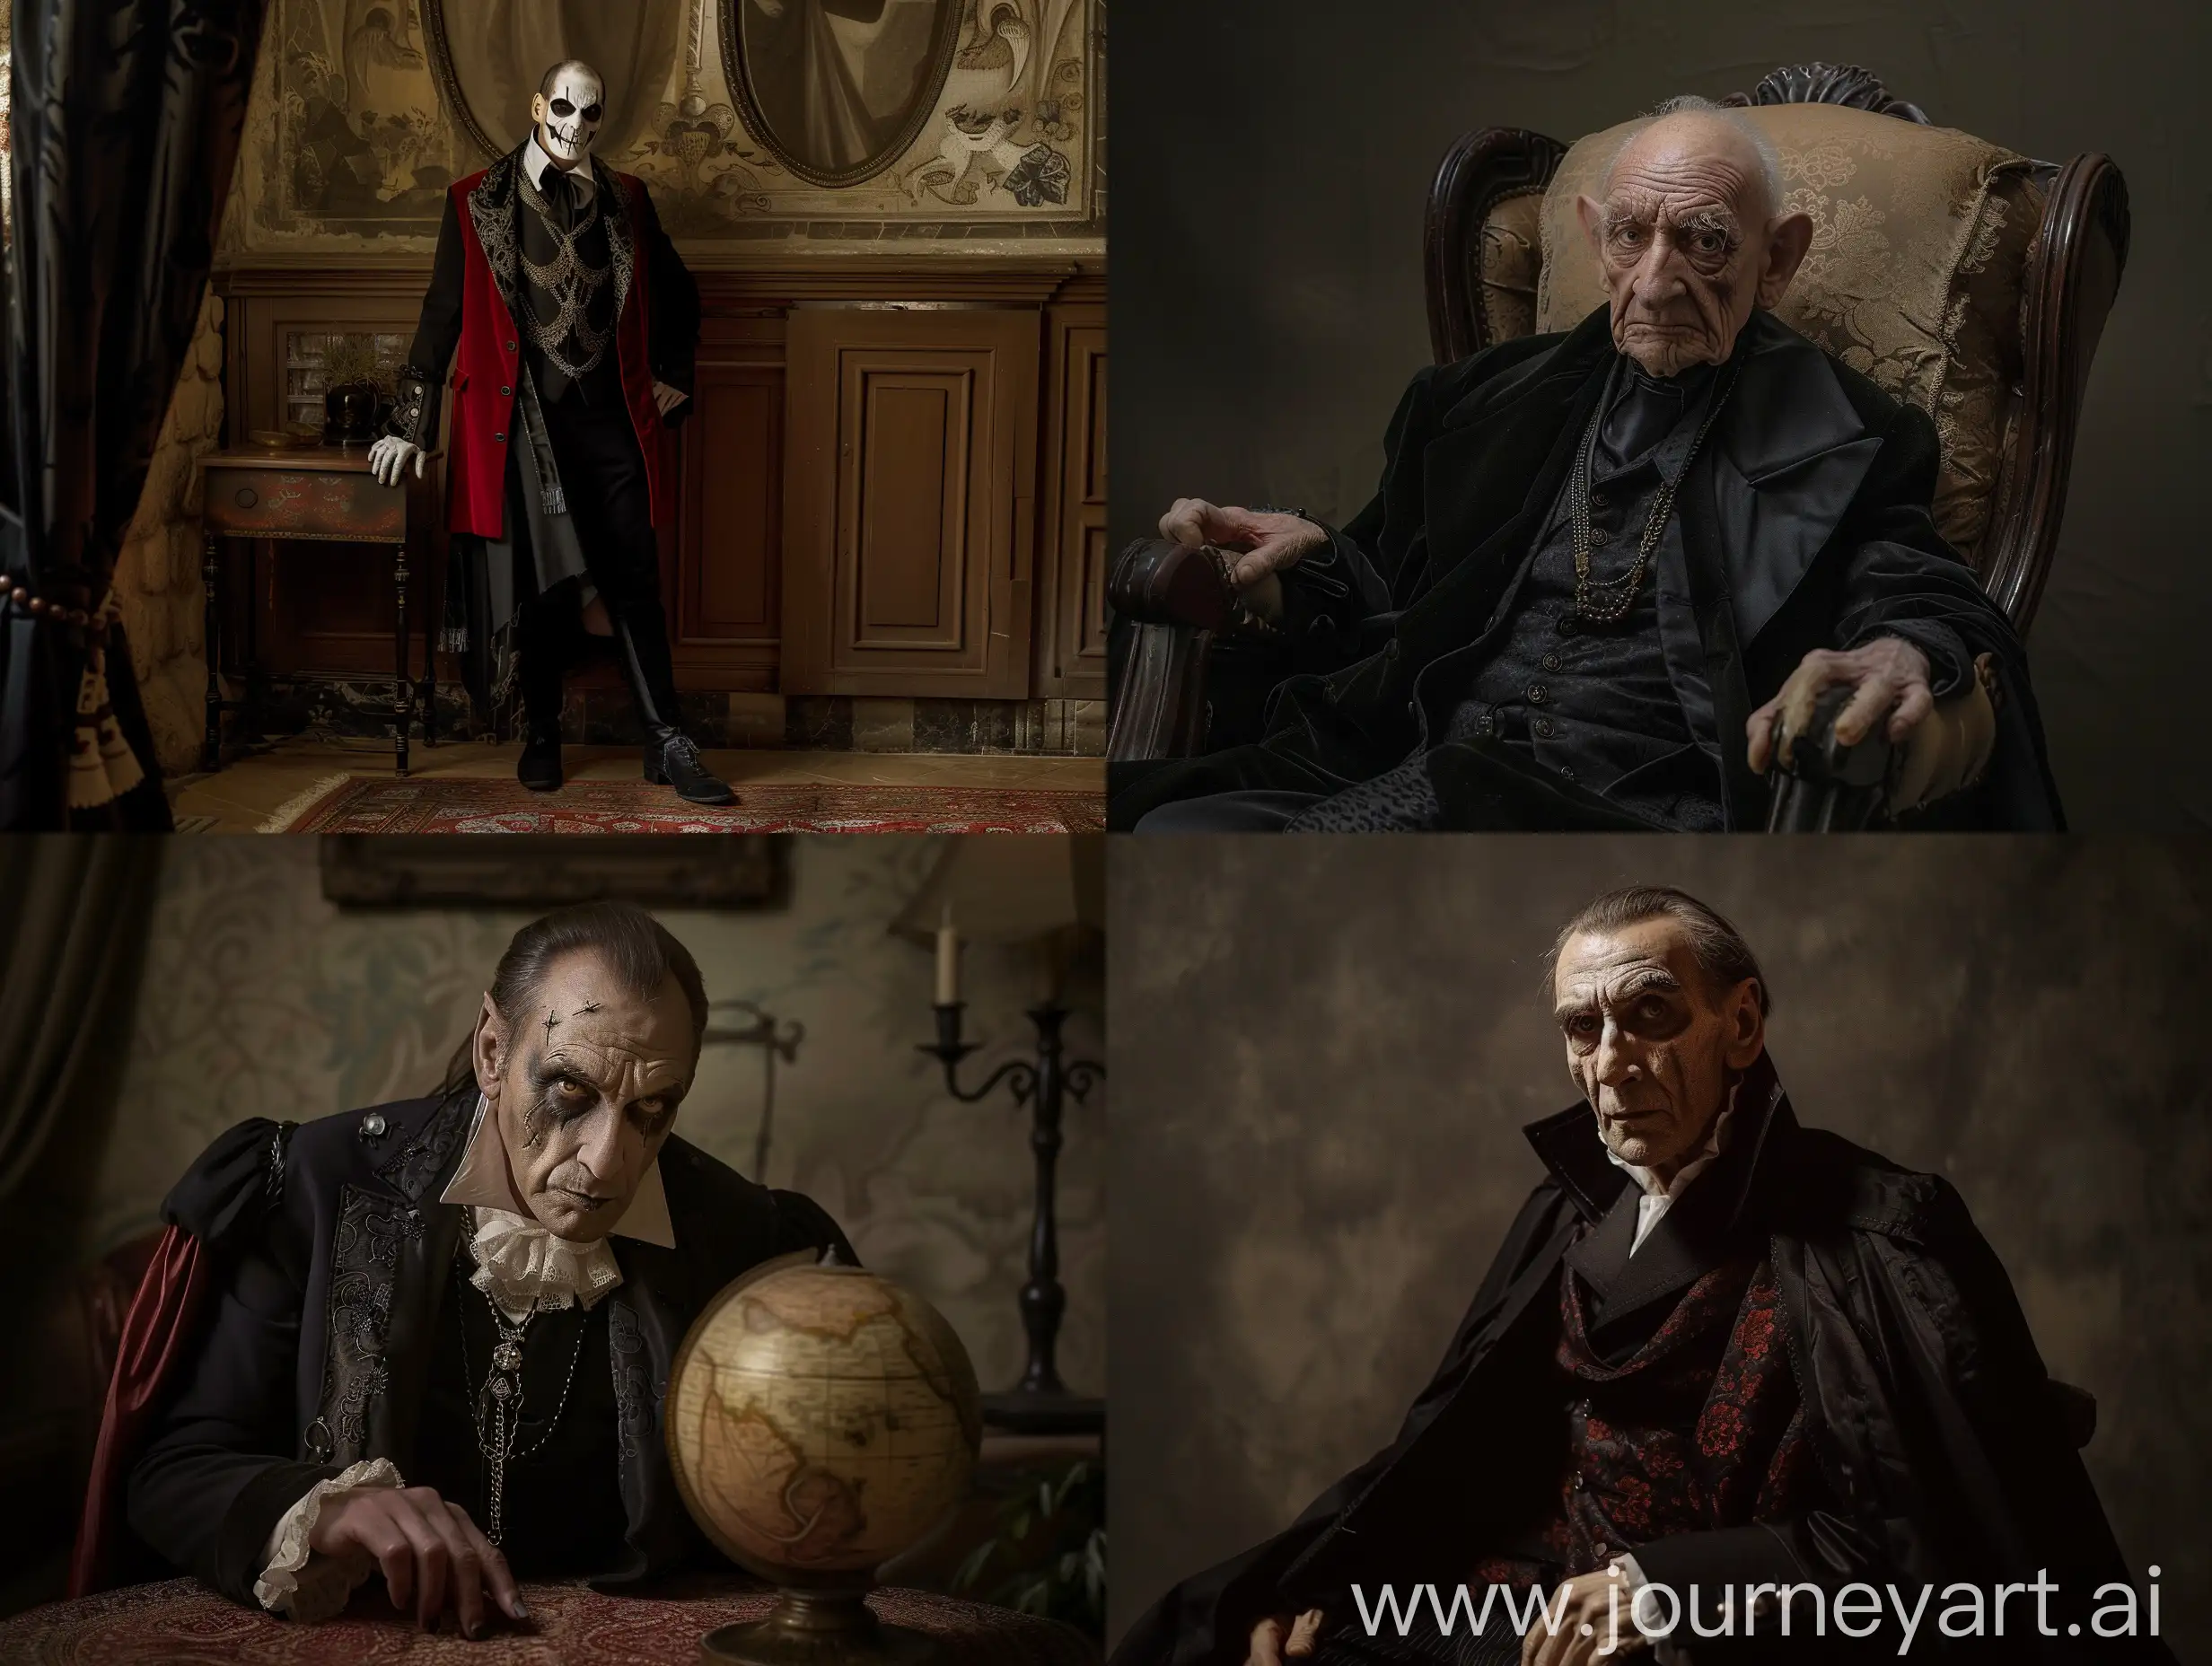 Count-Orlok-Visiting-Barcelona-with-His-Suite-Professional-Photo